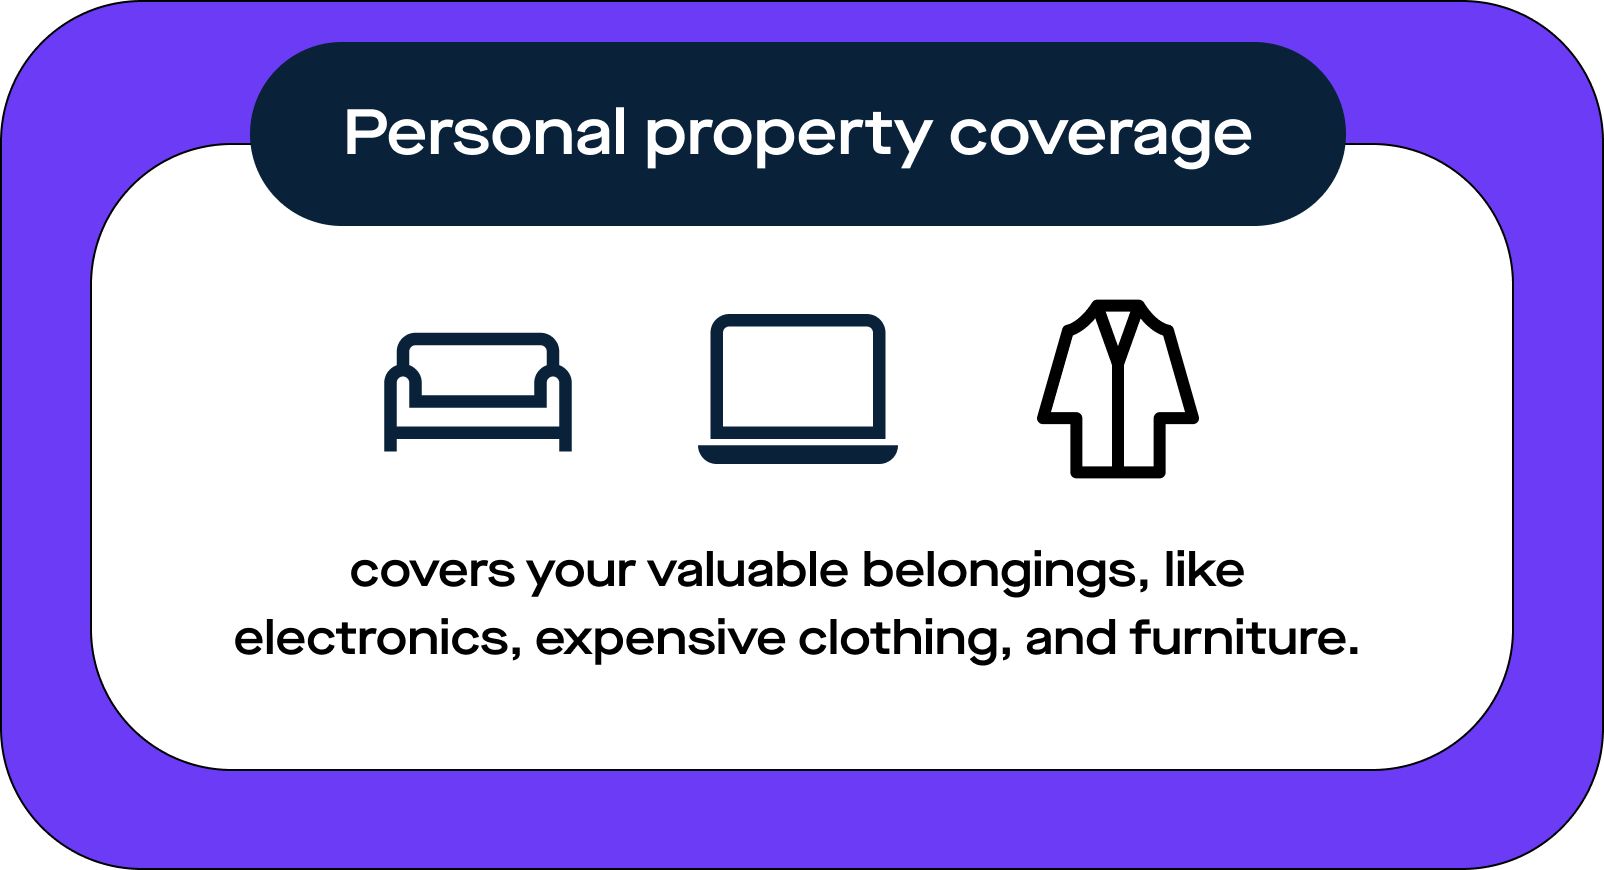 Image of "Personal property coverage." "covers your valuable belongings like electronics, expensive clothing, and furniture."